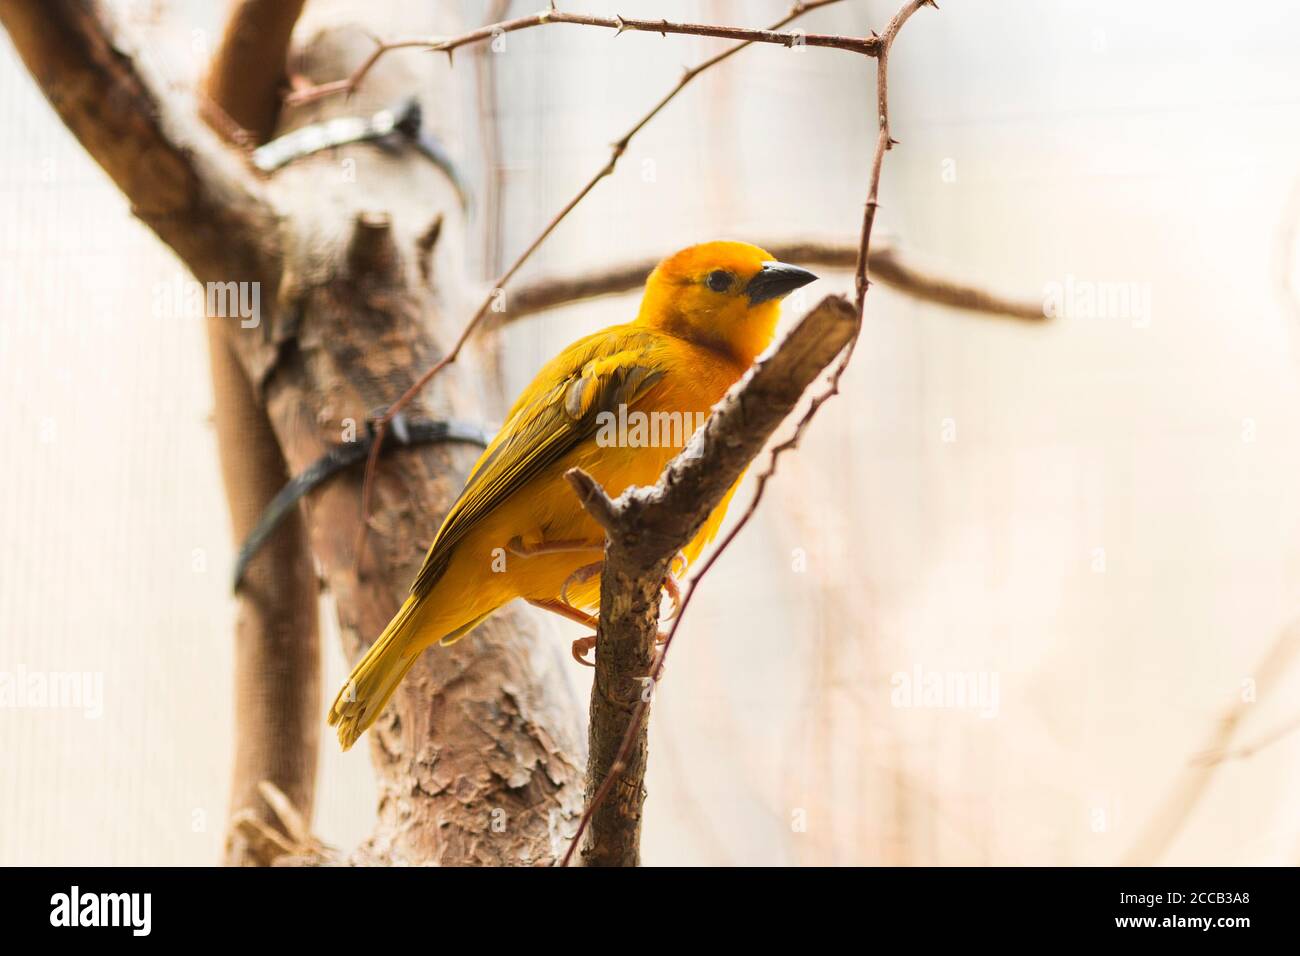 A saffron finch (Sicalis flaveola), a tanager from South America found in the Amazon Basin, perching on a branch. Stock Photo